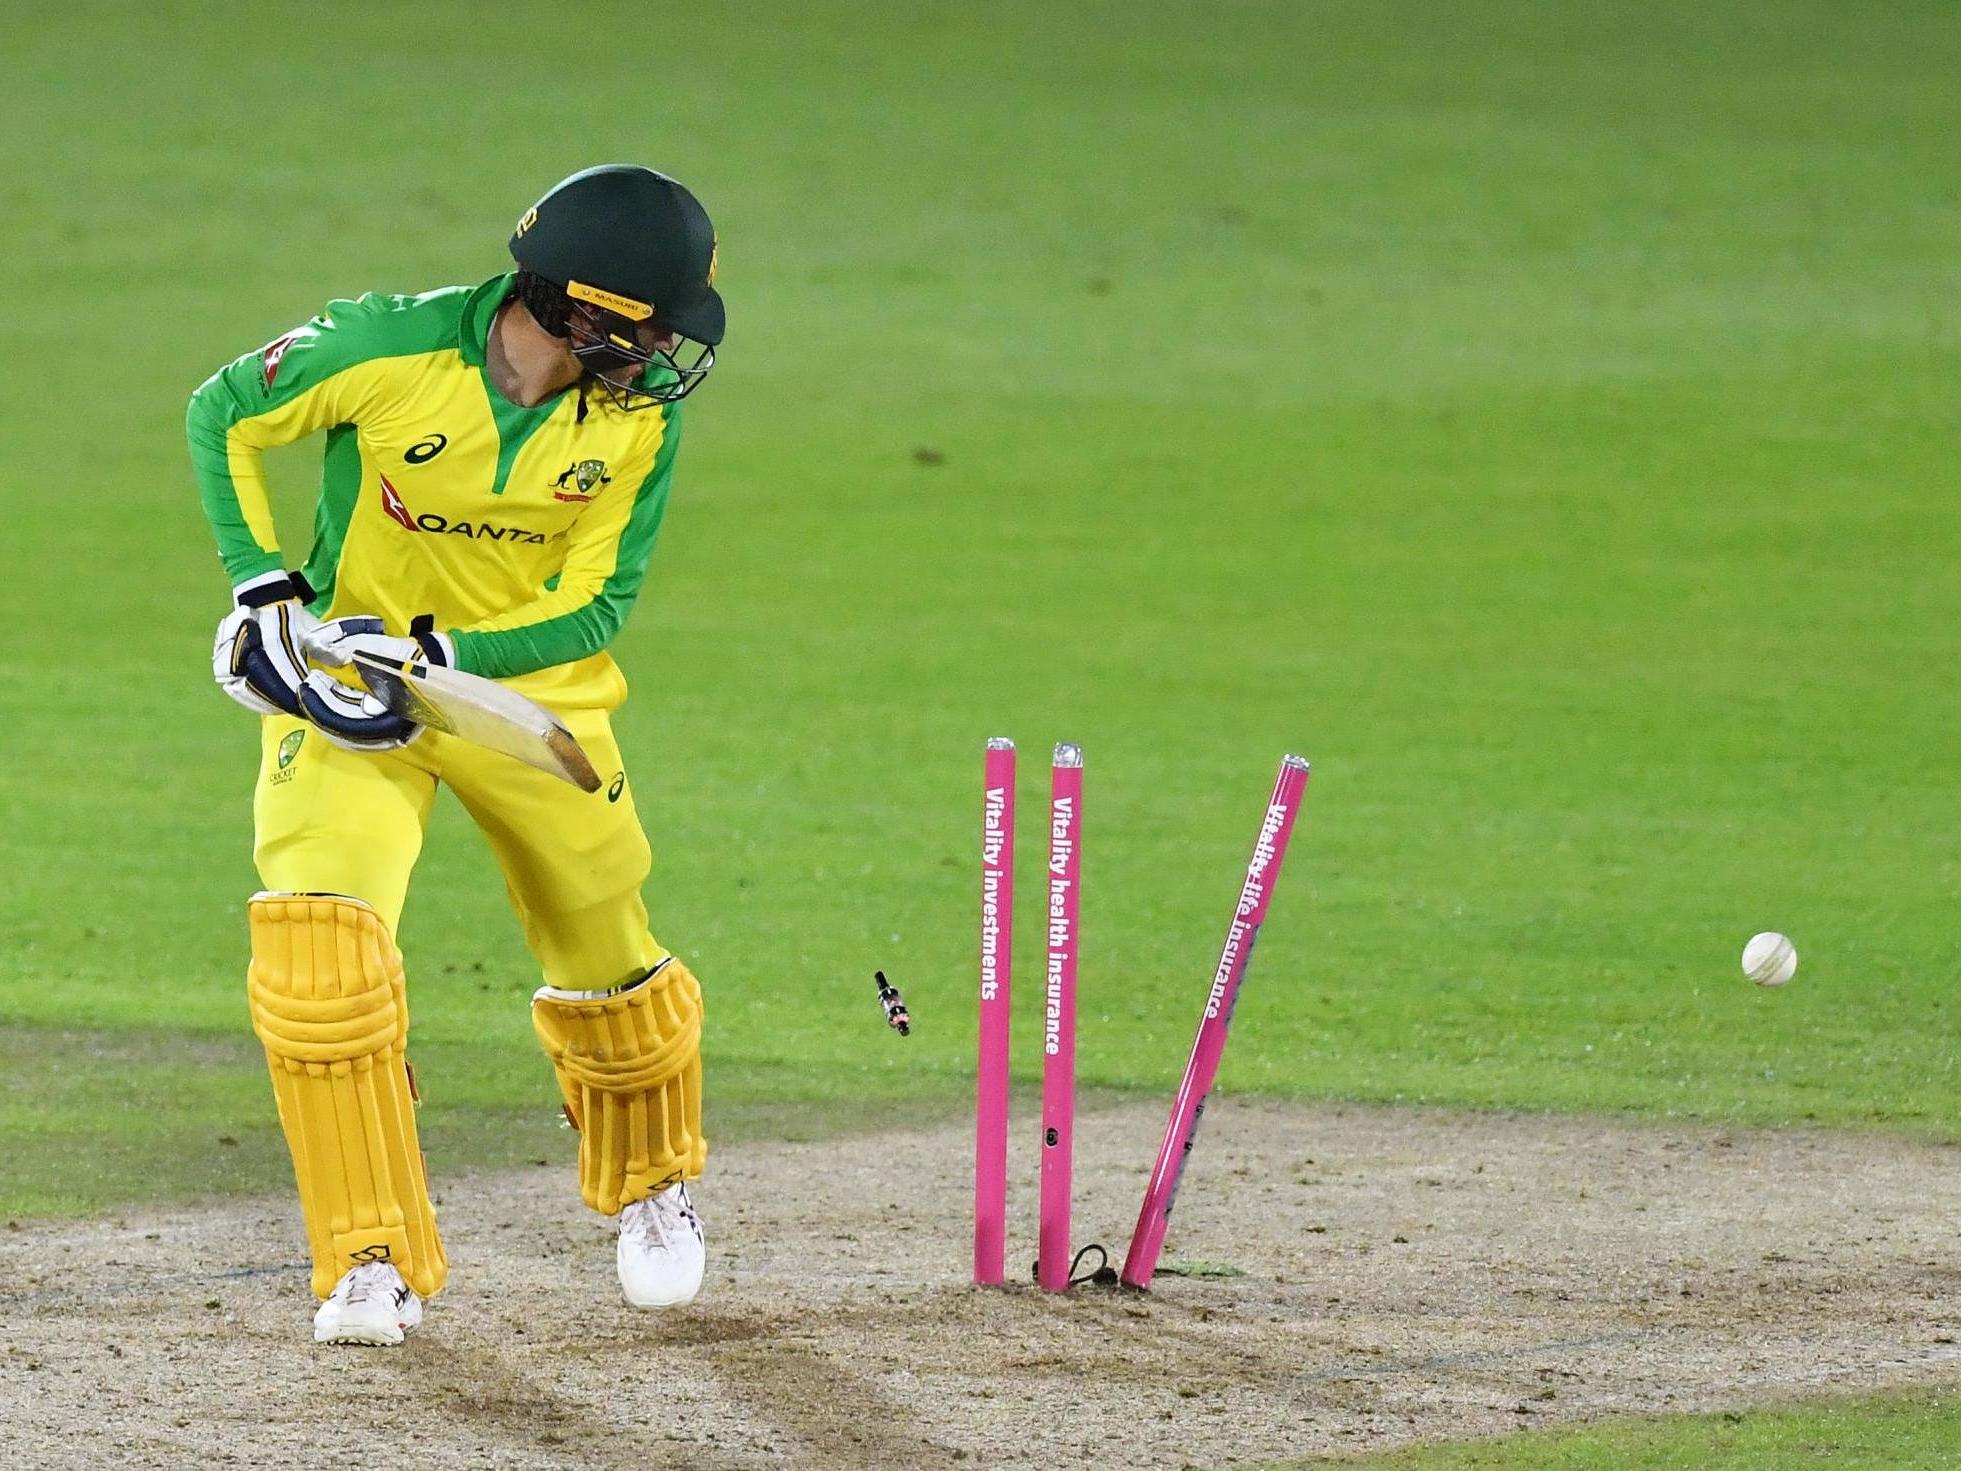 Alex Carey is bowled by Mark Wood as Australia come up short against England in a dramatic clash